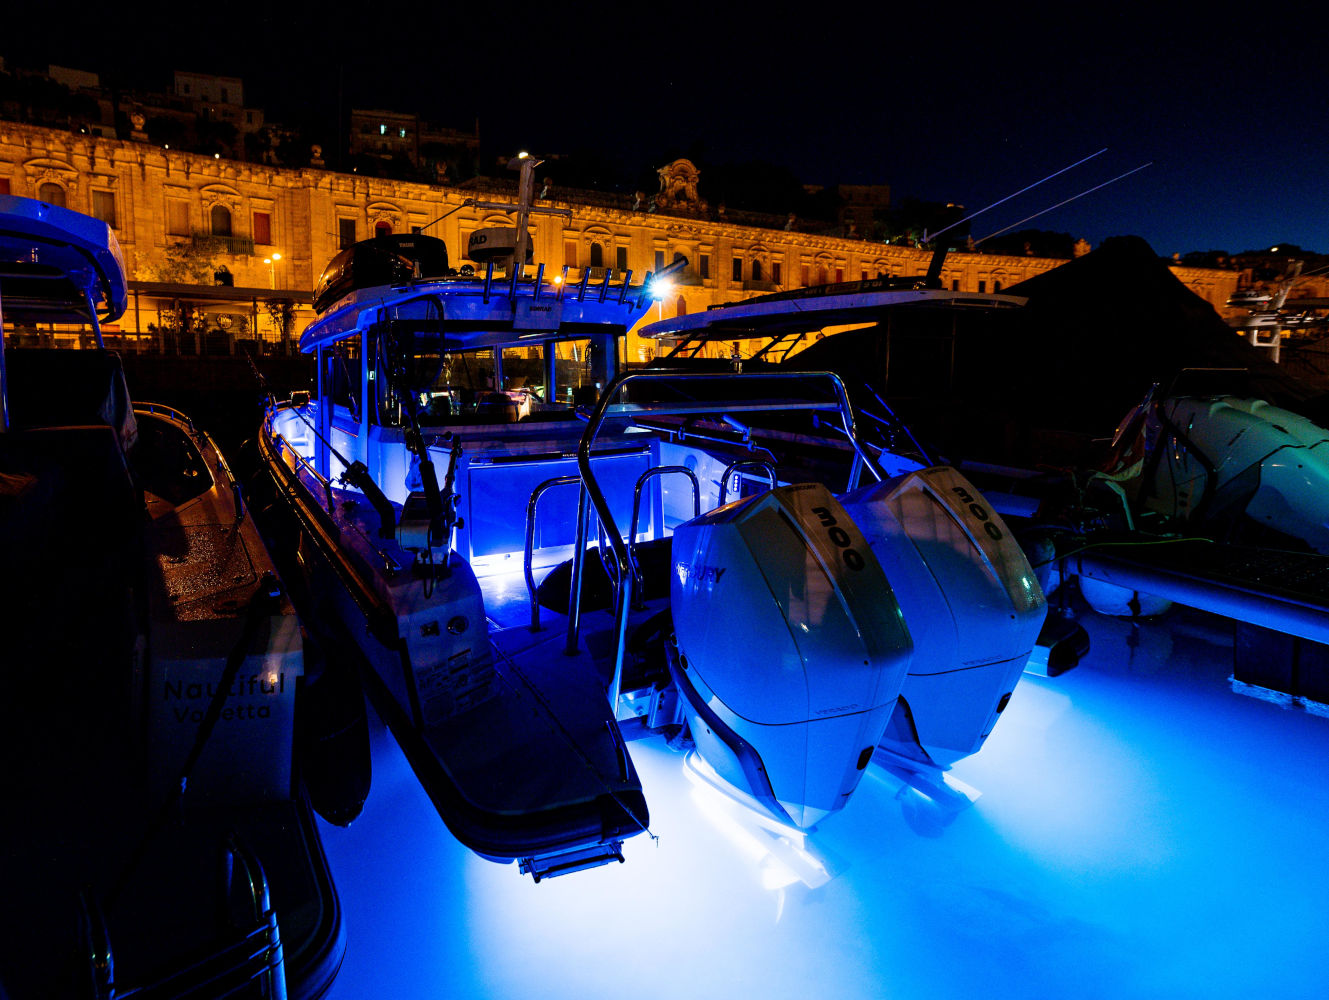 Enjoy a fancy nightcruise on this private party boat